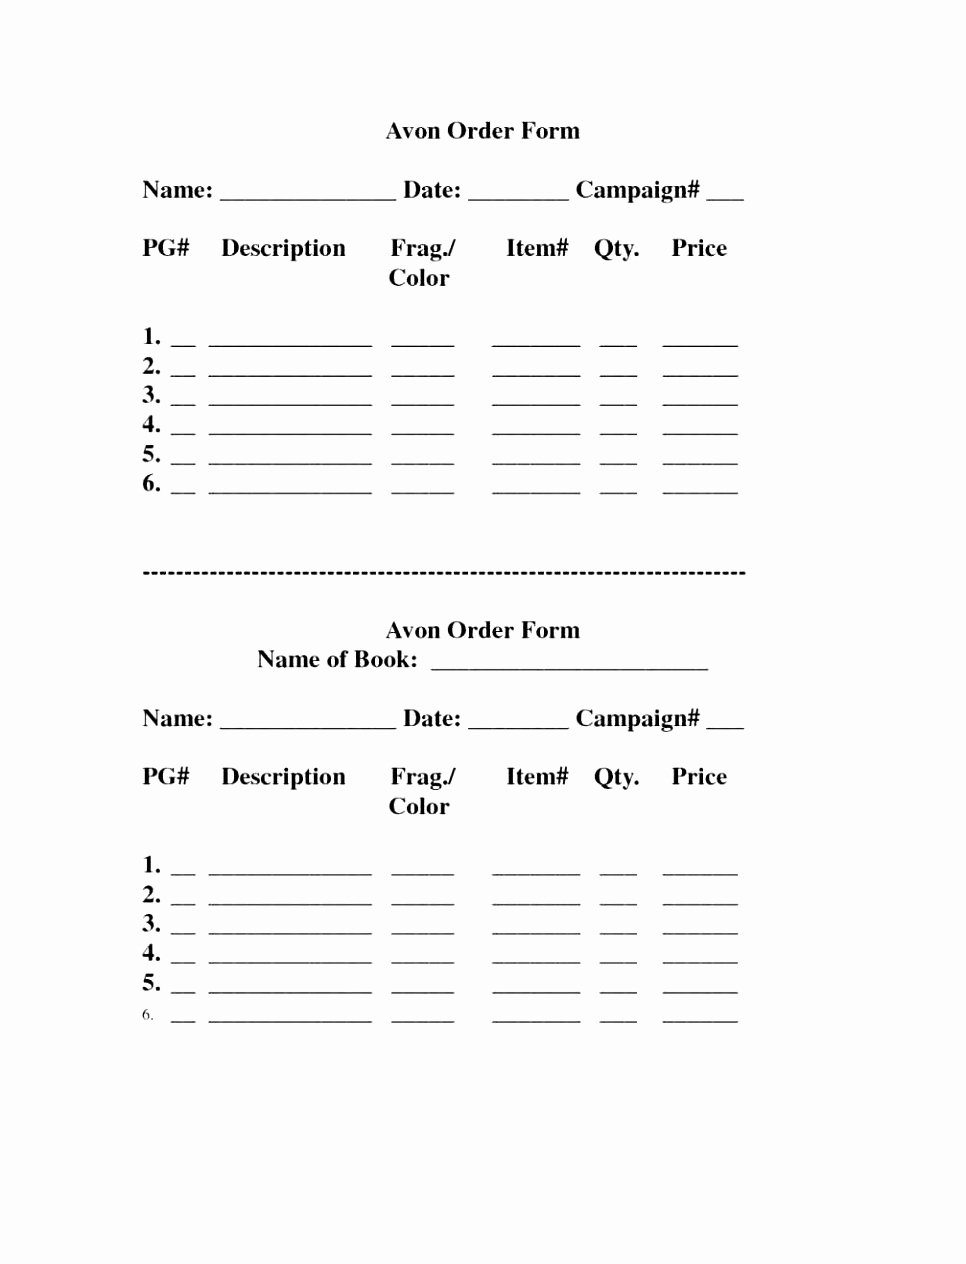 Pre order form Template Inspirational 6 Pre order form Template Free atery